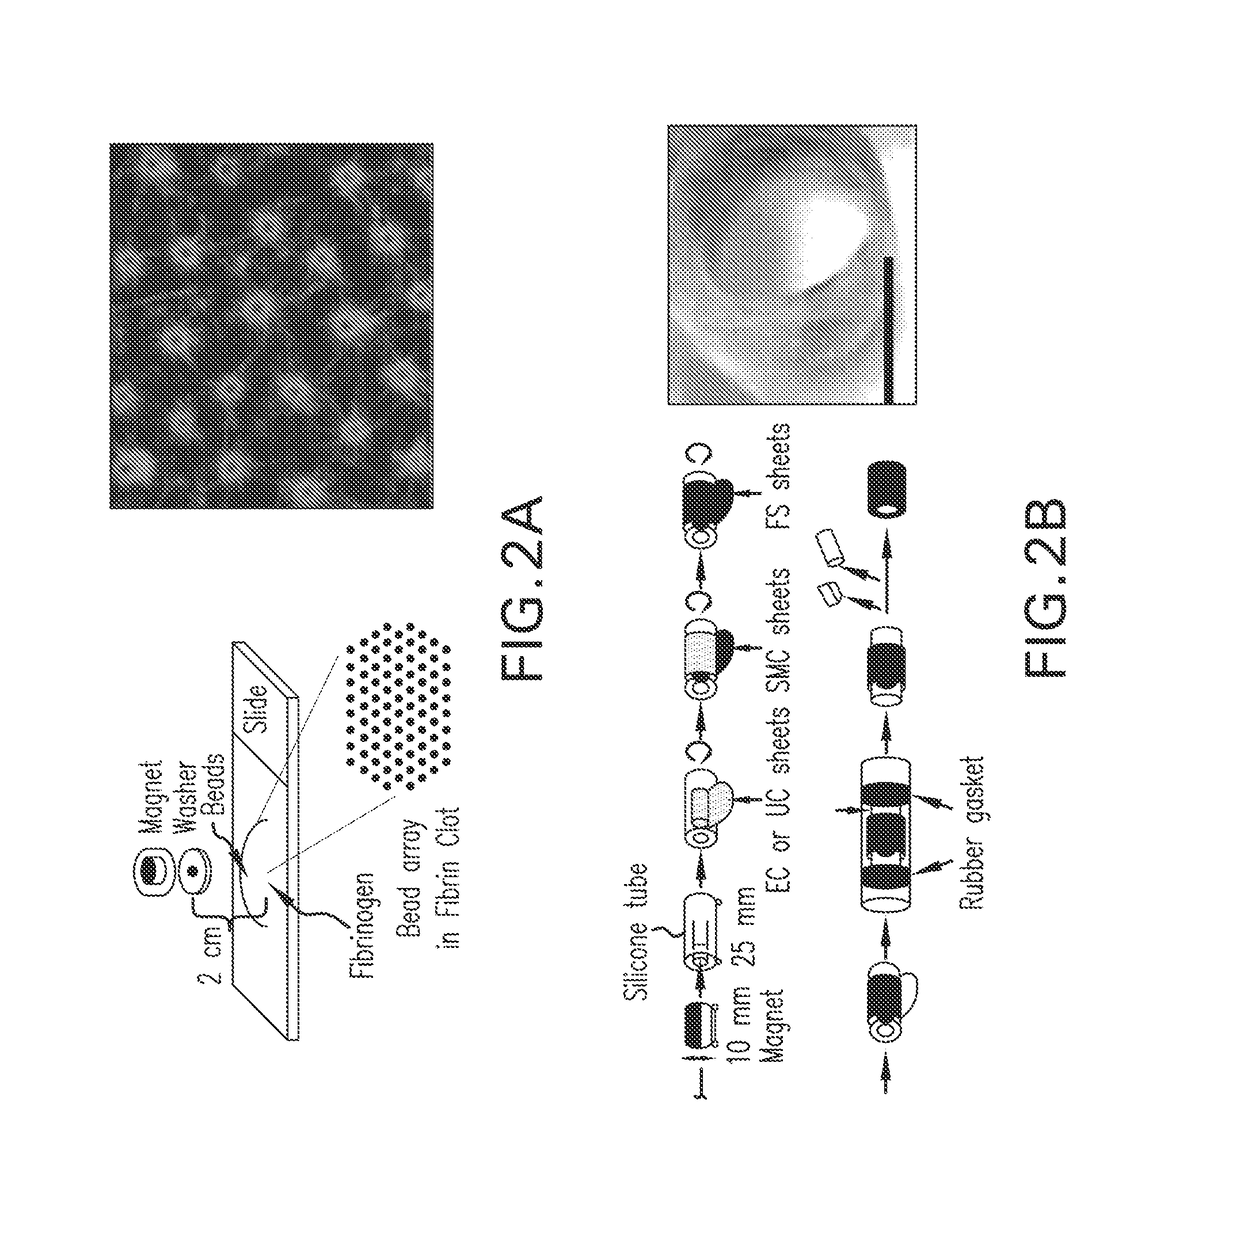 Magnetic directed alignment of stem cell scaffolds for regeneration